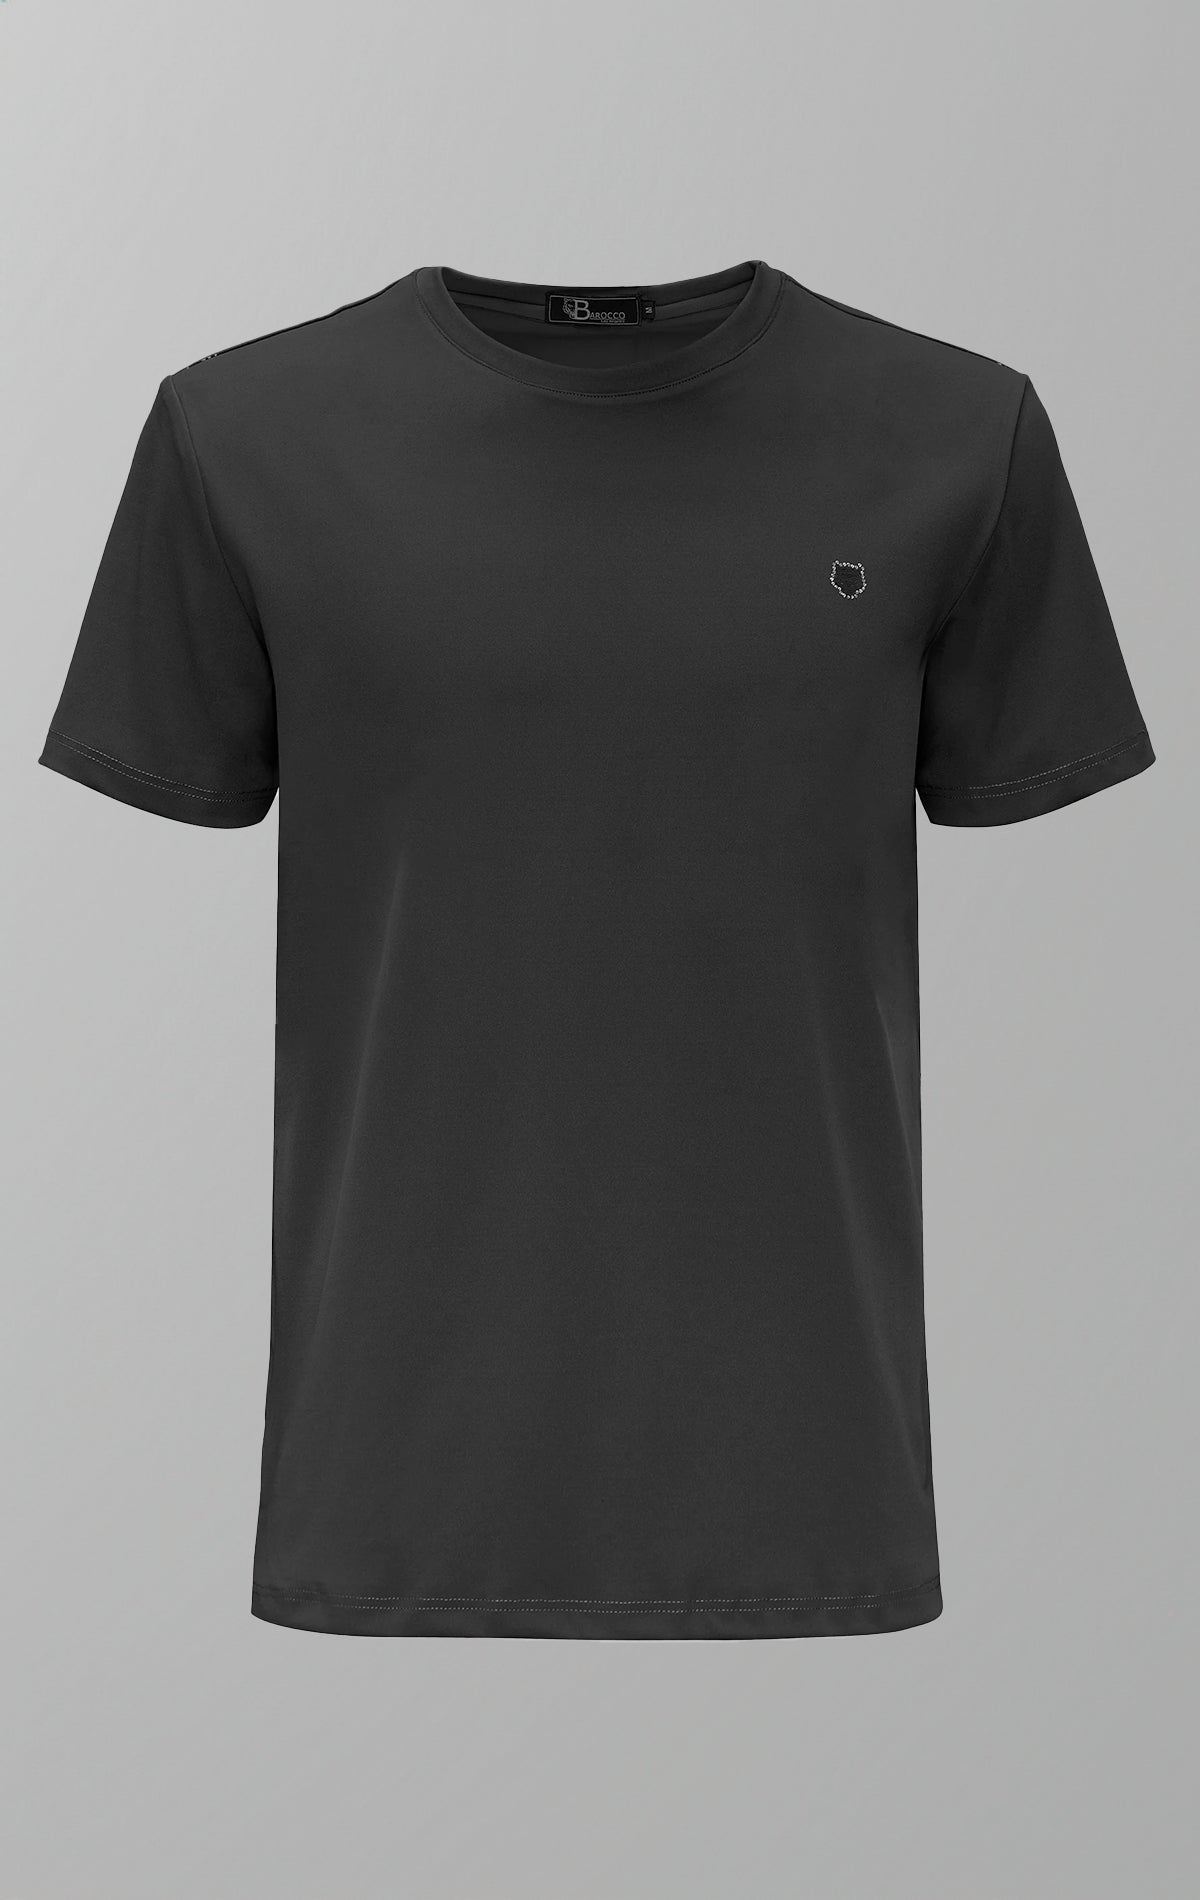 Elegant and comfortable men's tee in smooth fabric, perfect for casual and formal occasions